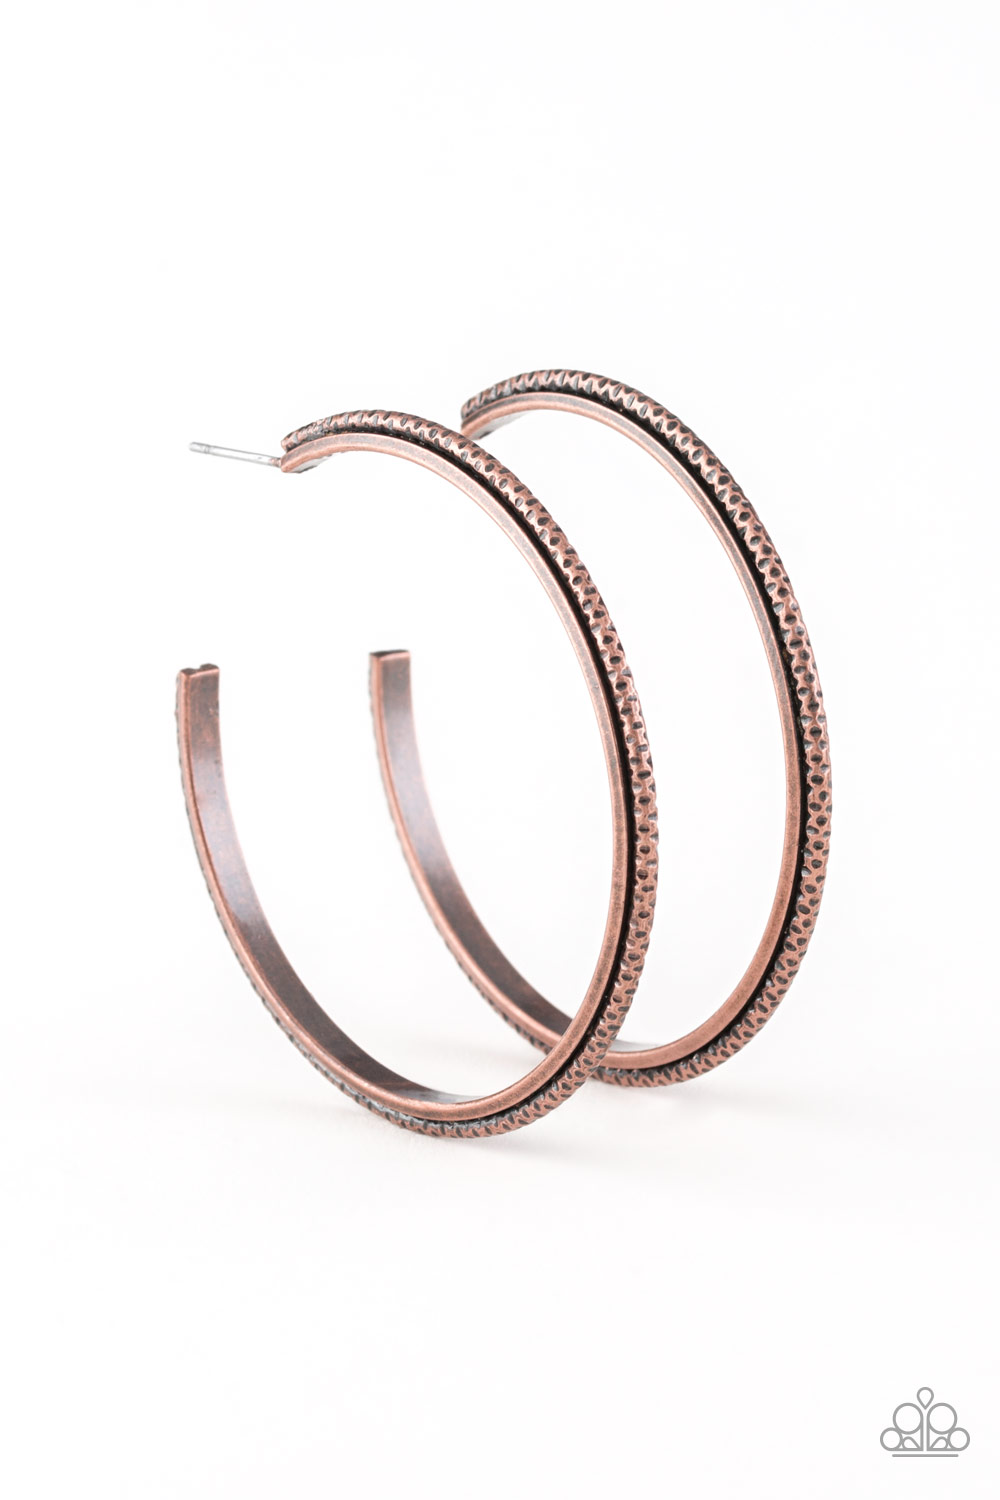 Paparazzi Accessories: Girl Gang - Copper